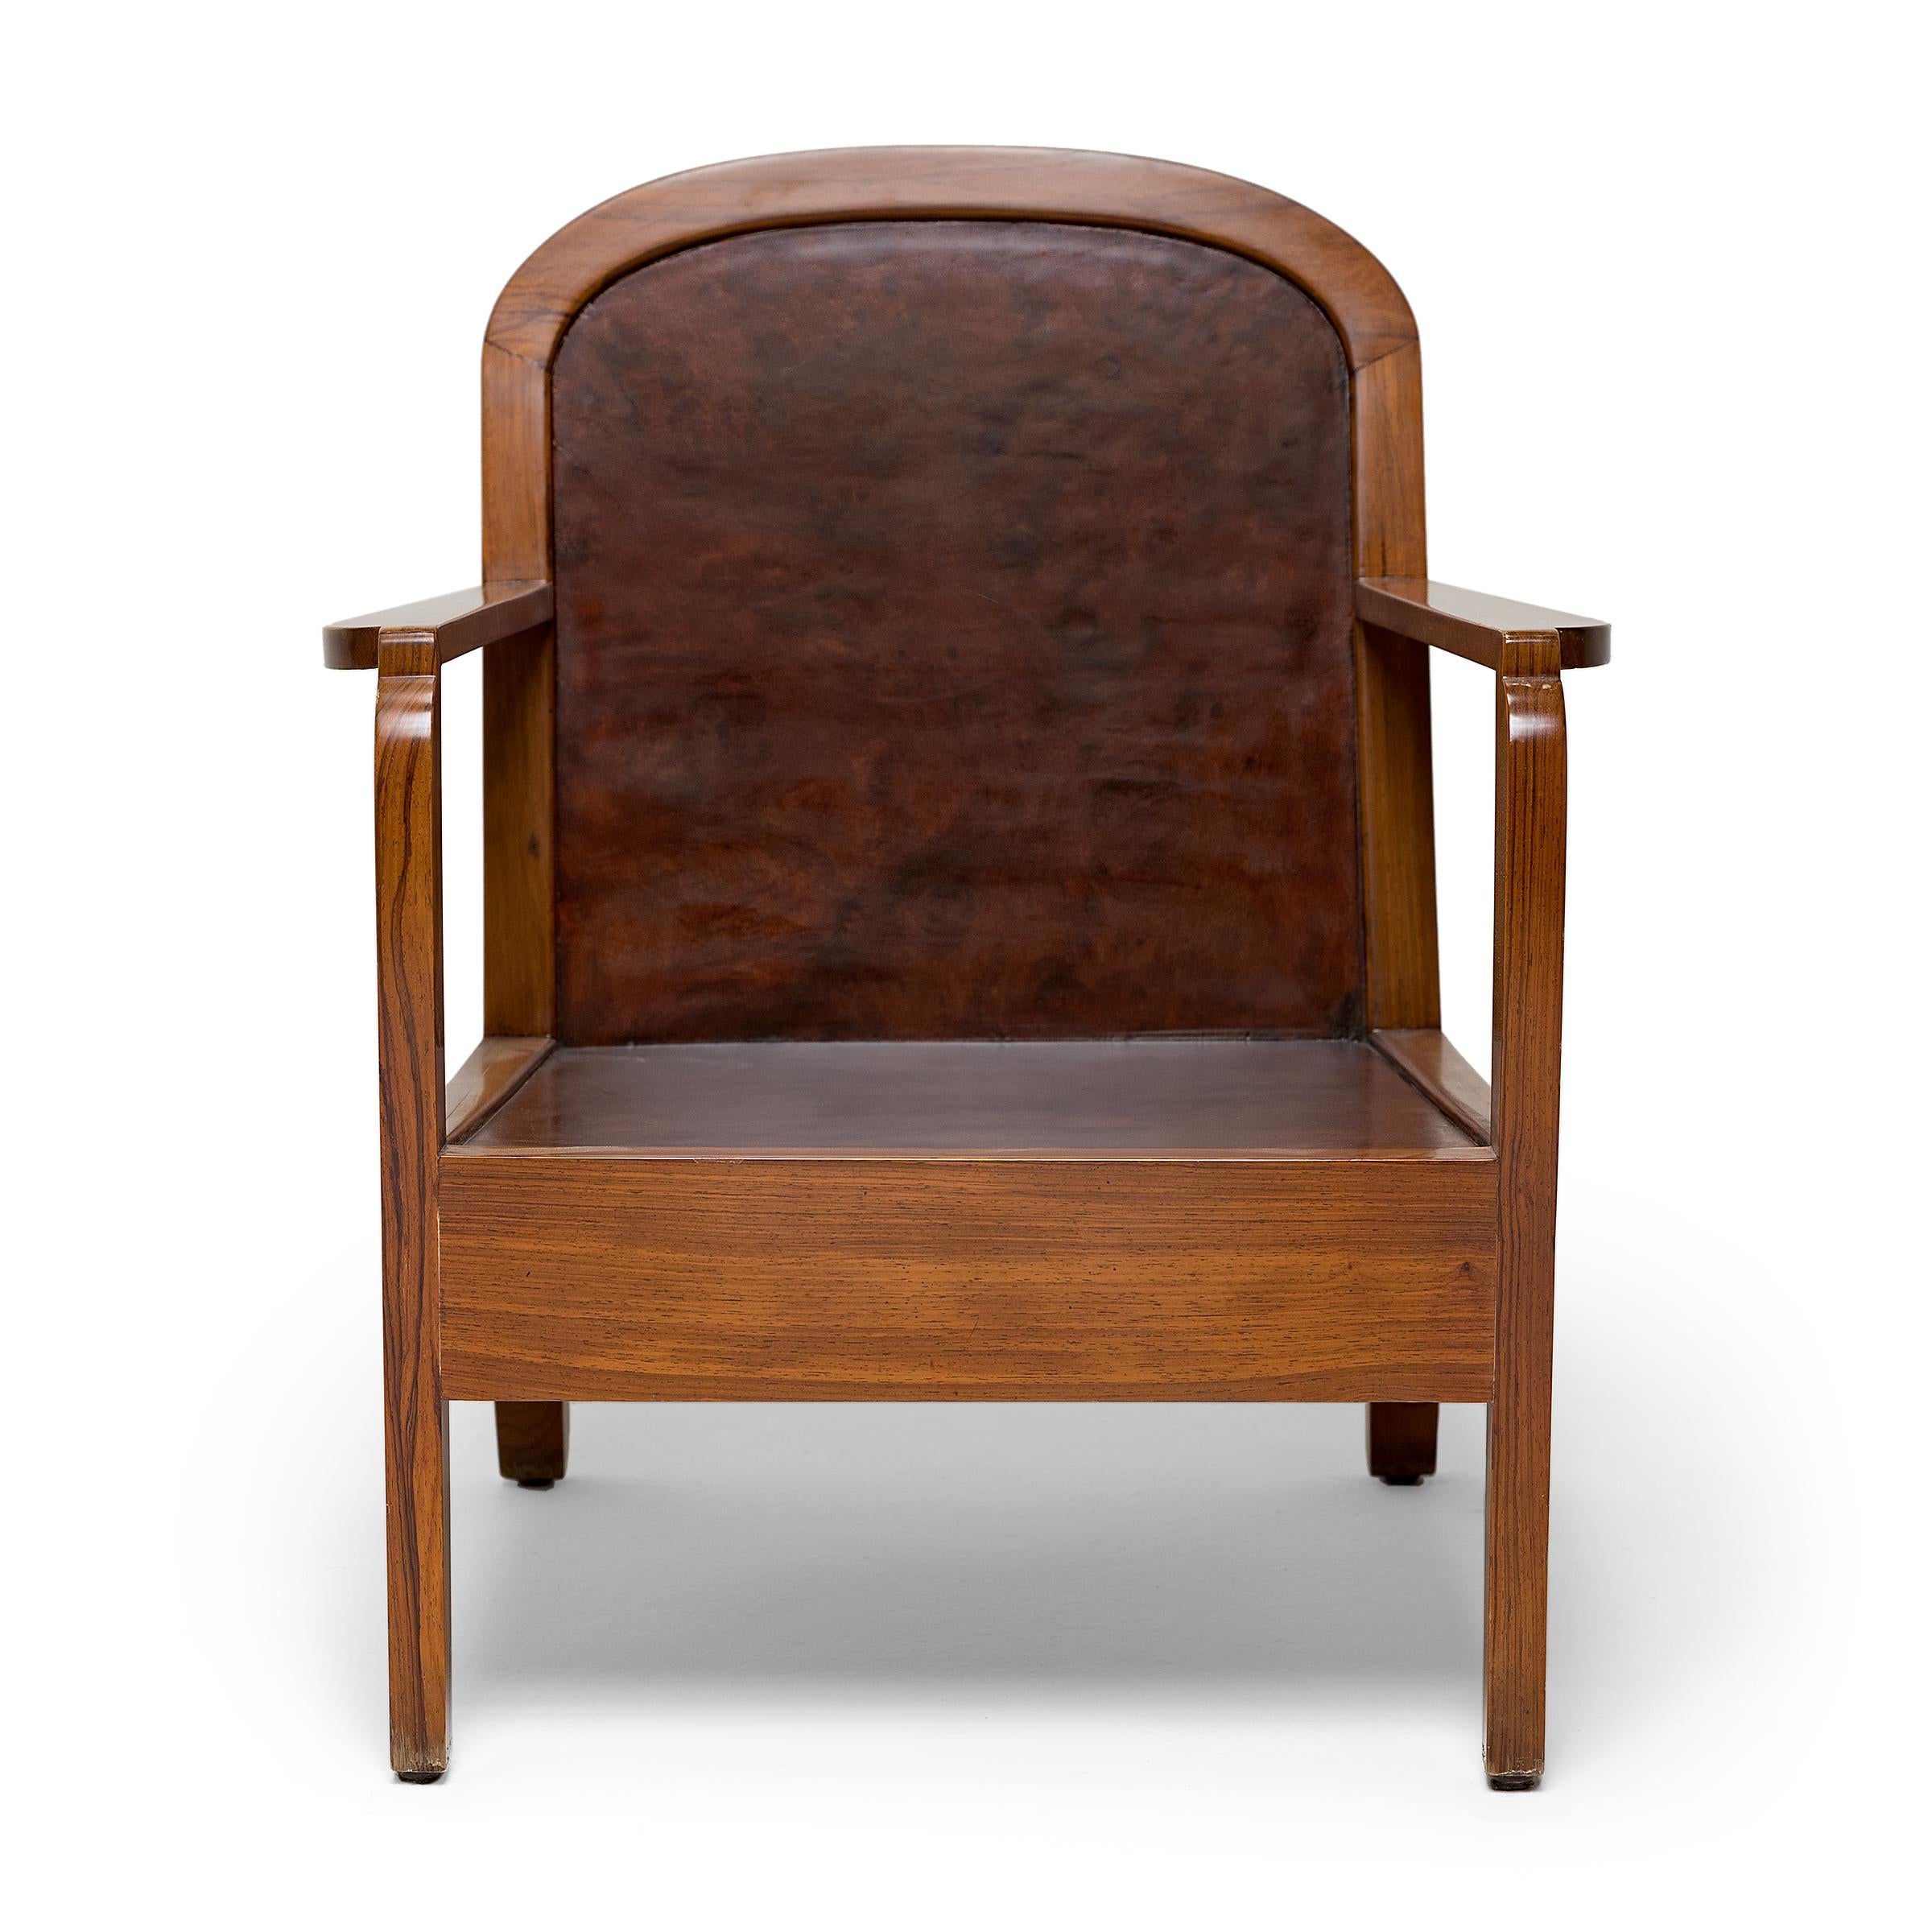 This Vietnamese Deco armchair is characterized by clean lines and smooth contours. Dated to the 1940s, the armchair is designed in the timeless style of the Art Deco period, when traditional art and furniture was reimagined with streamlined form and